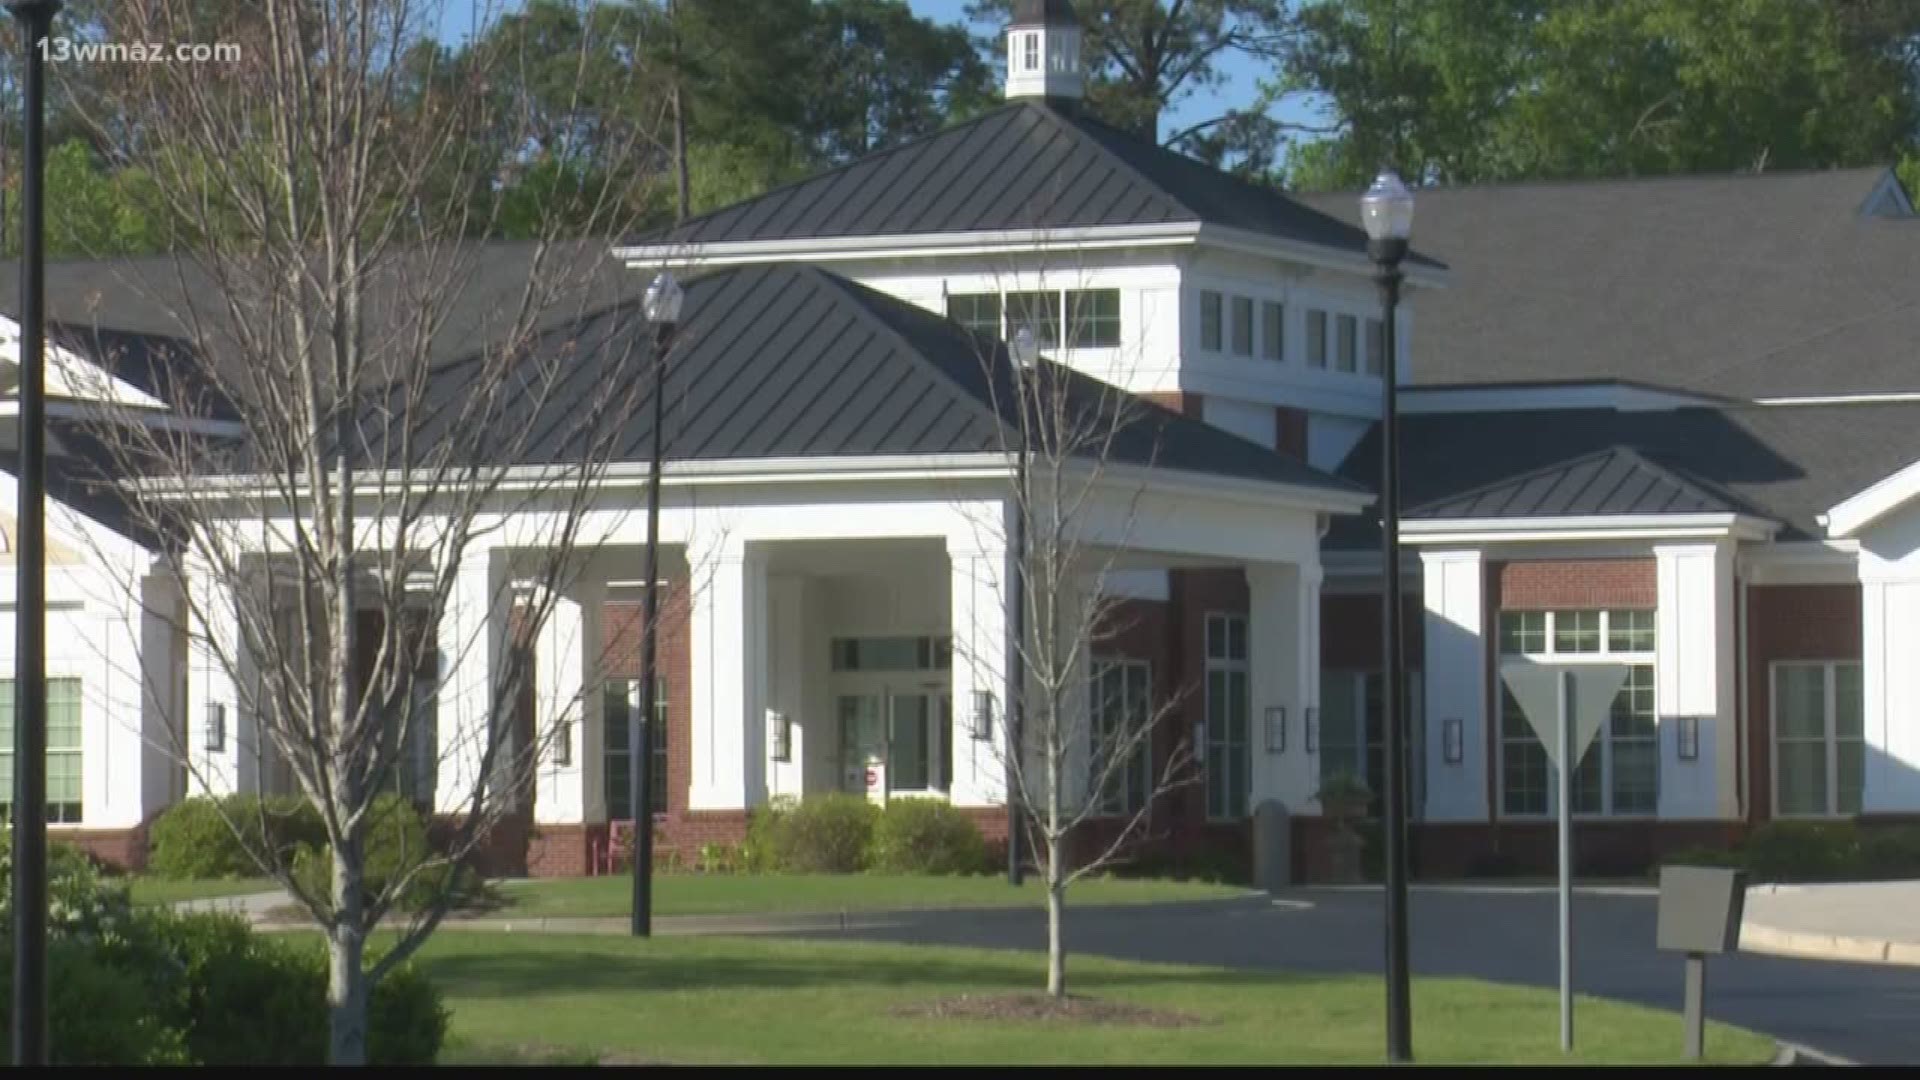 2 Macon nursing homes are dealing with COVID-19 outbreaks, according the Georgia Department of Public Health.